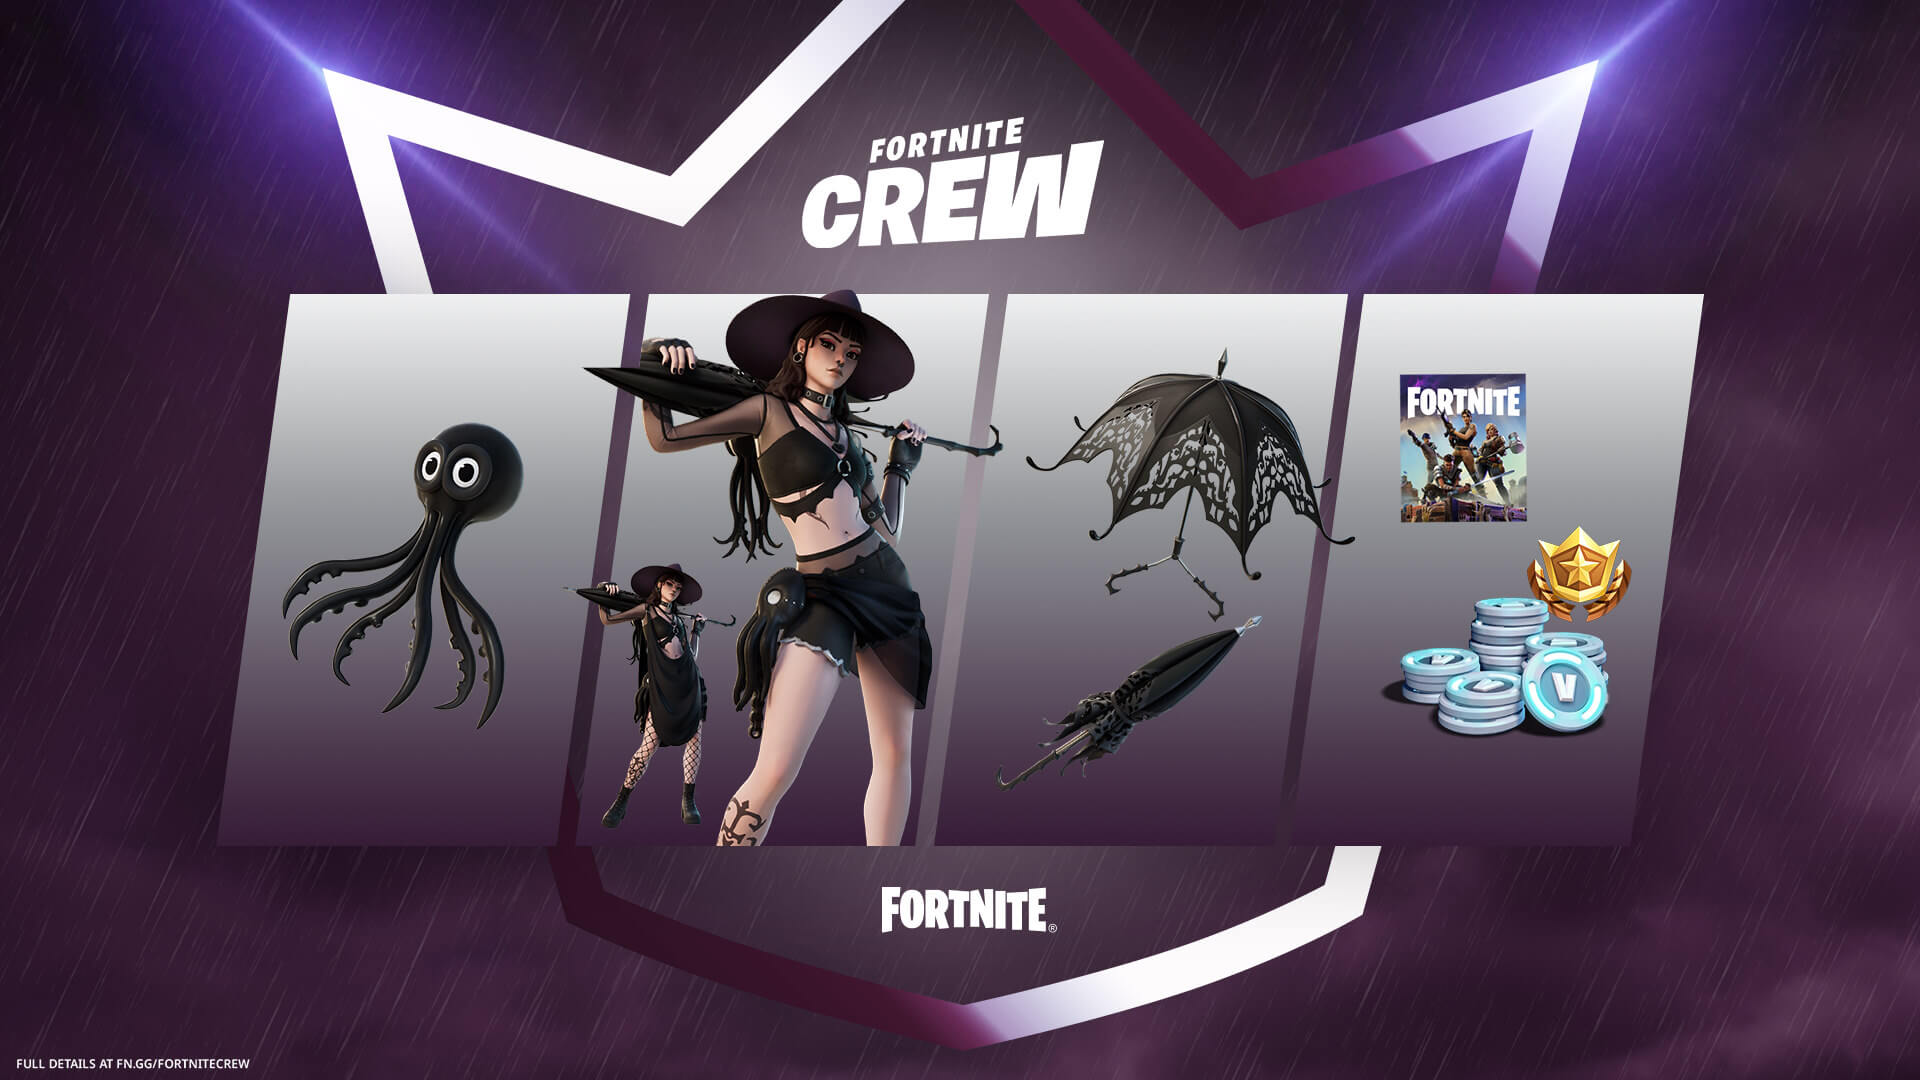 fortnite-july-crew-pack-v-bucks-battle-pass-and-save-the-world-1920x1080-2d134a21745e